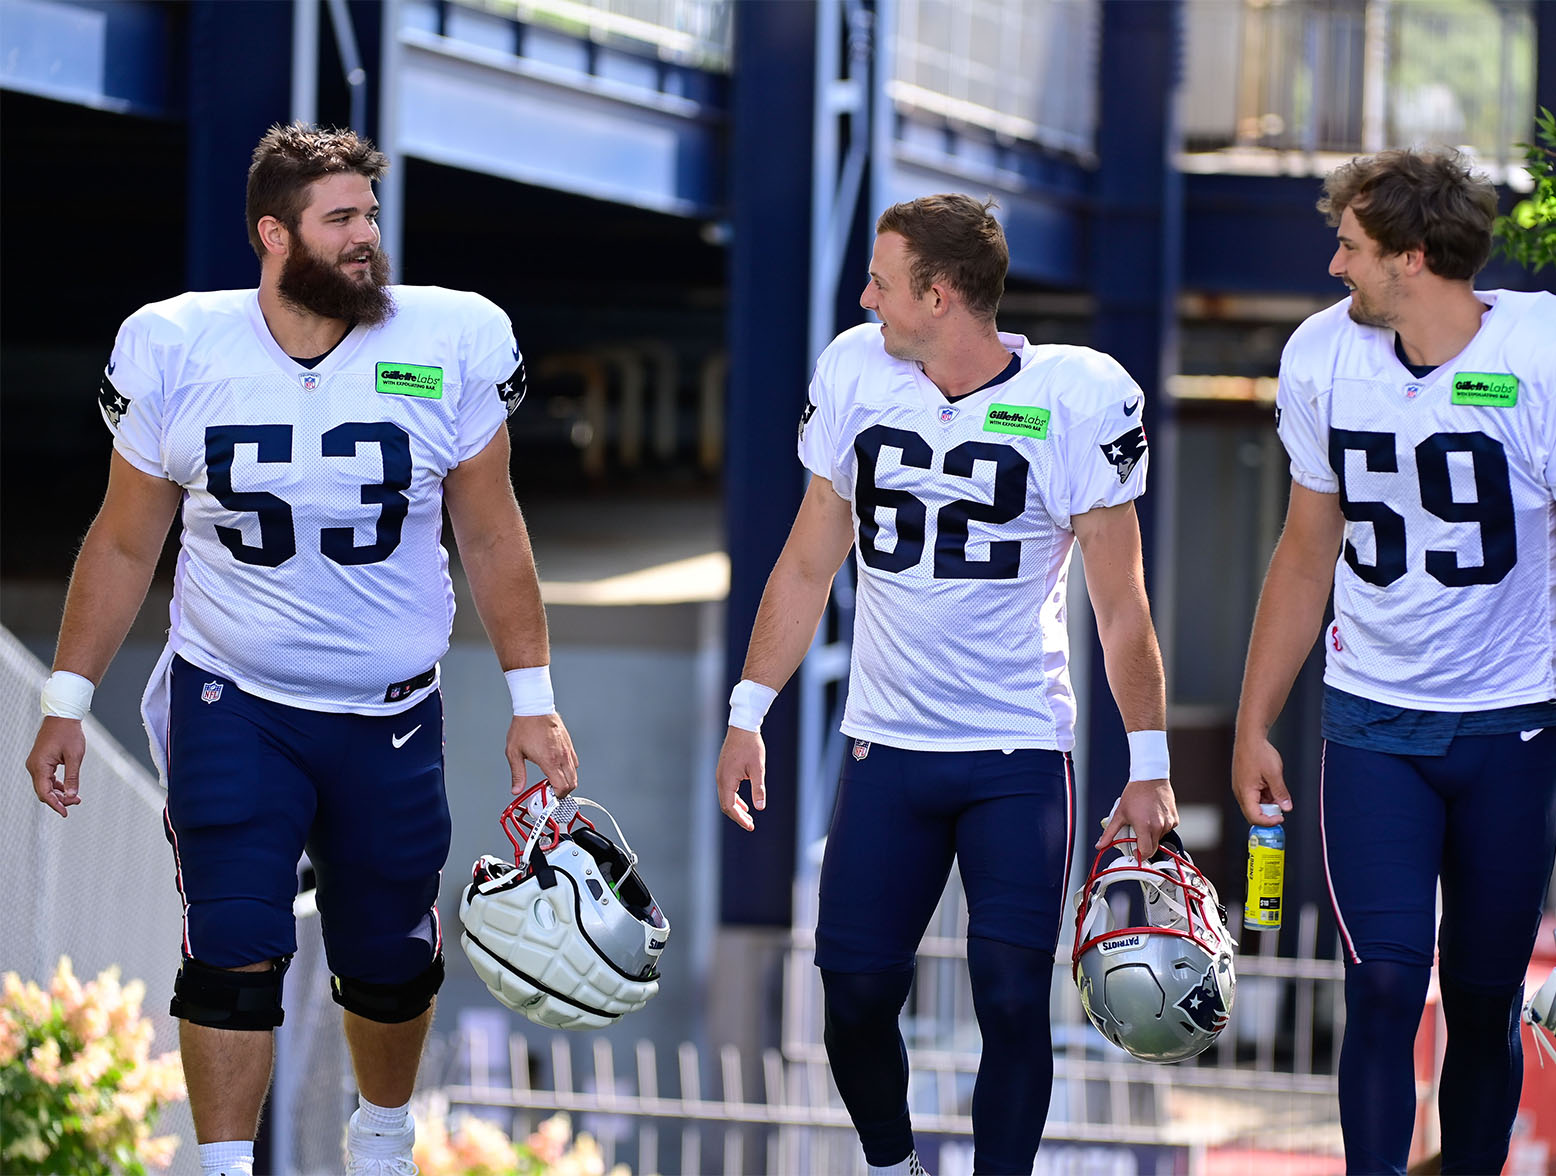 Aug 3, 2023; Foxborough, MA, USA; New England Patriots center Jake Andrews (53) chats with place kicker Chad Ryland (62) and punter Bryce Baringer (59) on their way to the practice fields at training camp at Gillette Stadium. Mandatory Credit: Eric Canha-USA TODAY Sports